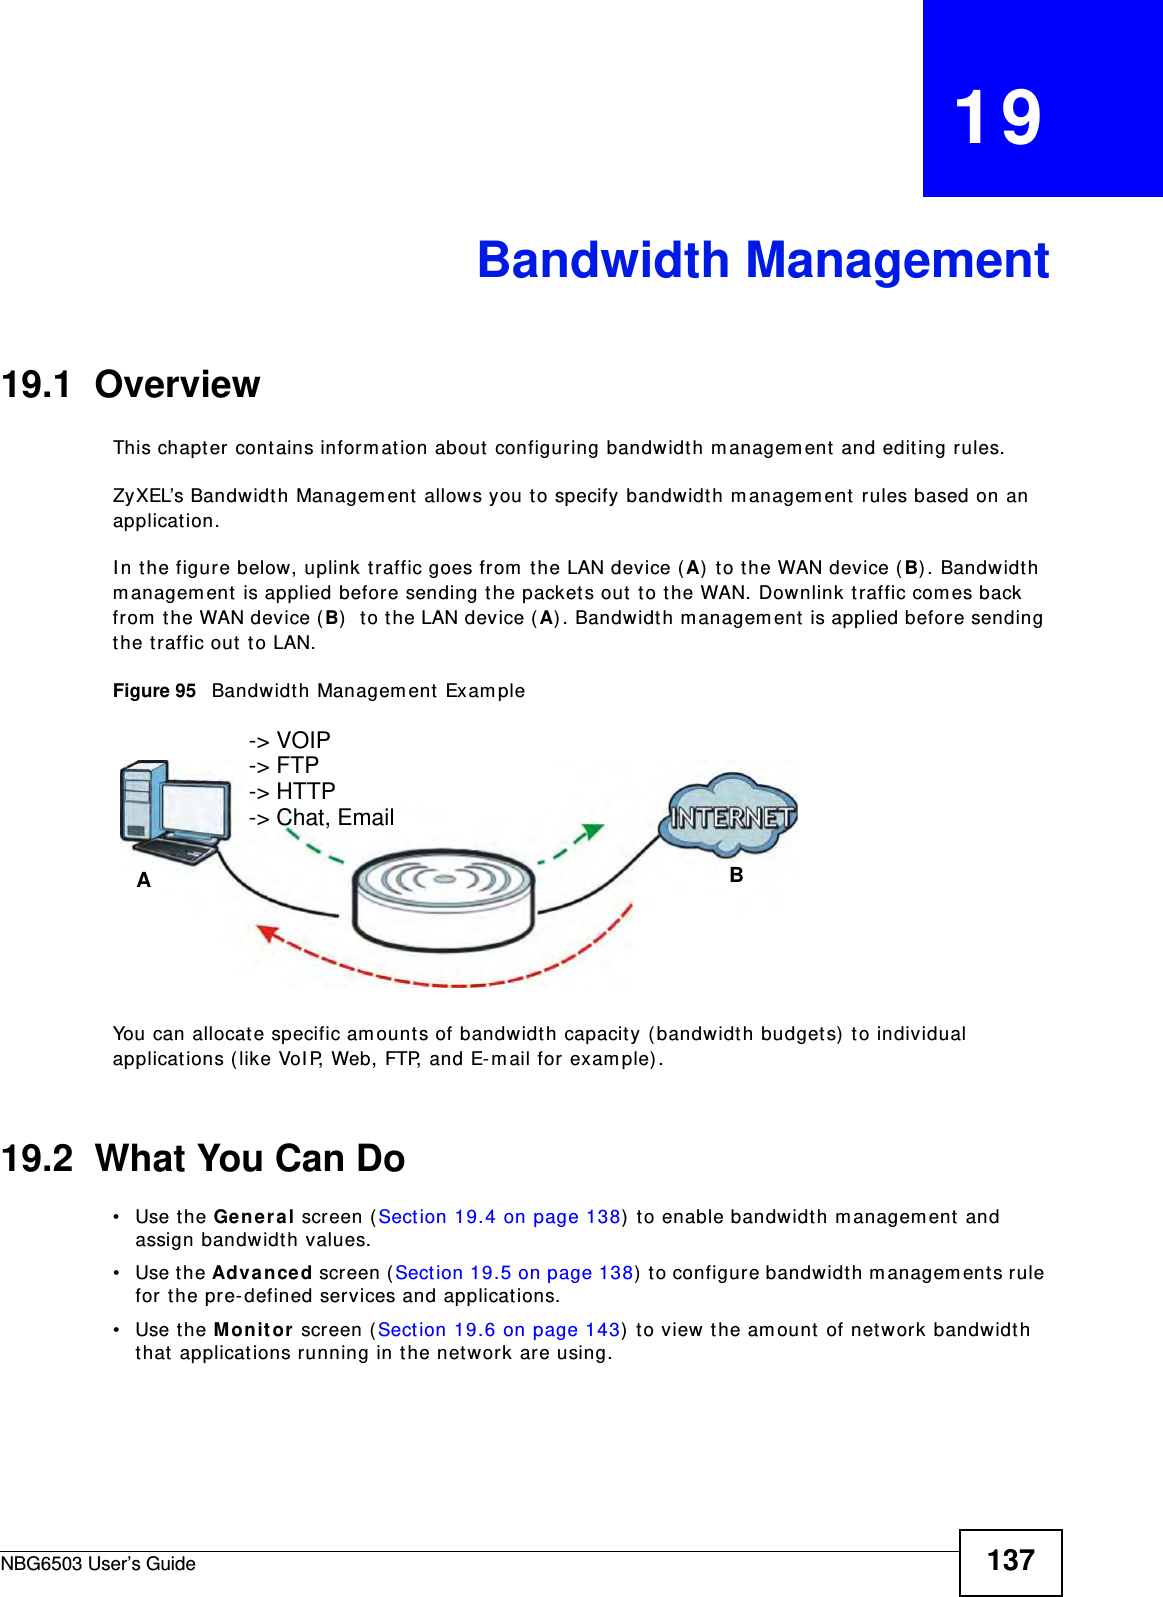 NBG6503 User’s Guide 137CHAPTER   19Bandwidth Management19.1  Overview This chapter contains information about configuring bandwidth management and editing rules.ZyXEL’s Bandwidth Management allows you to specify bandwidth management rules based on an application. In the figure below, uplink traffic goes from the LAN device (A) to the WAN device (B). Bandwidth management is applied before sending the packets out to the WAN. Downlink traffic comes back from the WAN device (B)  to the LAN device (A). Bandwidth management is applied before sending the traffic out to LAN.Figure 95   Bandwidth Management ExampleYou can allocate specific amounts of bandwidth capacity (bandwidth budgets) to individual applications (like VoIP, Web, FTP, and E-mail for example).19.2  What You Can Do•Use the General screen (Section 19.4 on page 138) to enable bandwidth management and assign bandwidth values.•Use the Advanced screen (Section 19.5 on page 138) to configure bandwidth managements rule for the pre-defined services and applications.•Use the Monitor screen (Section 19.6 on page 143) to view the amount of network bandwidth that applications running in the network are using.AB-&gt; VOIP-&gt; FTP-&gt; HTTP-&gt; Chat, Email